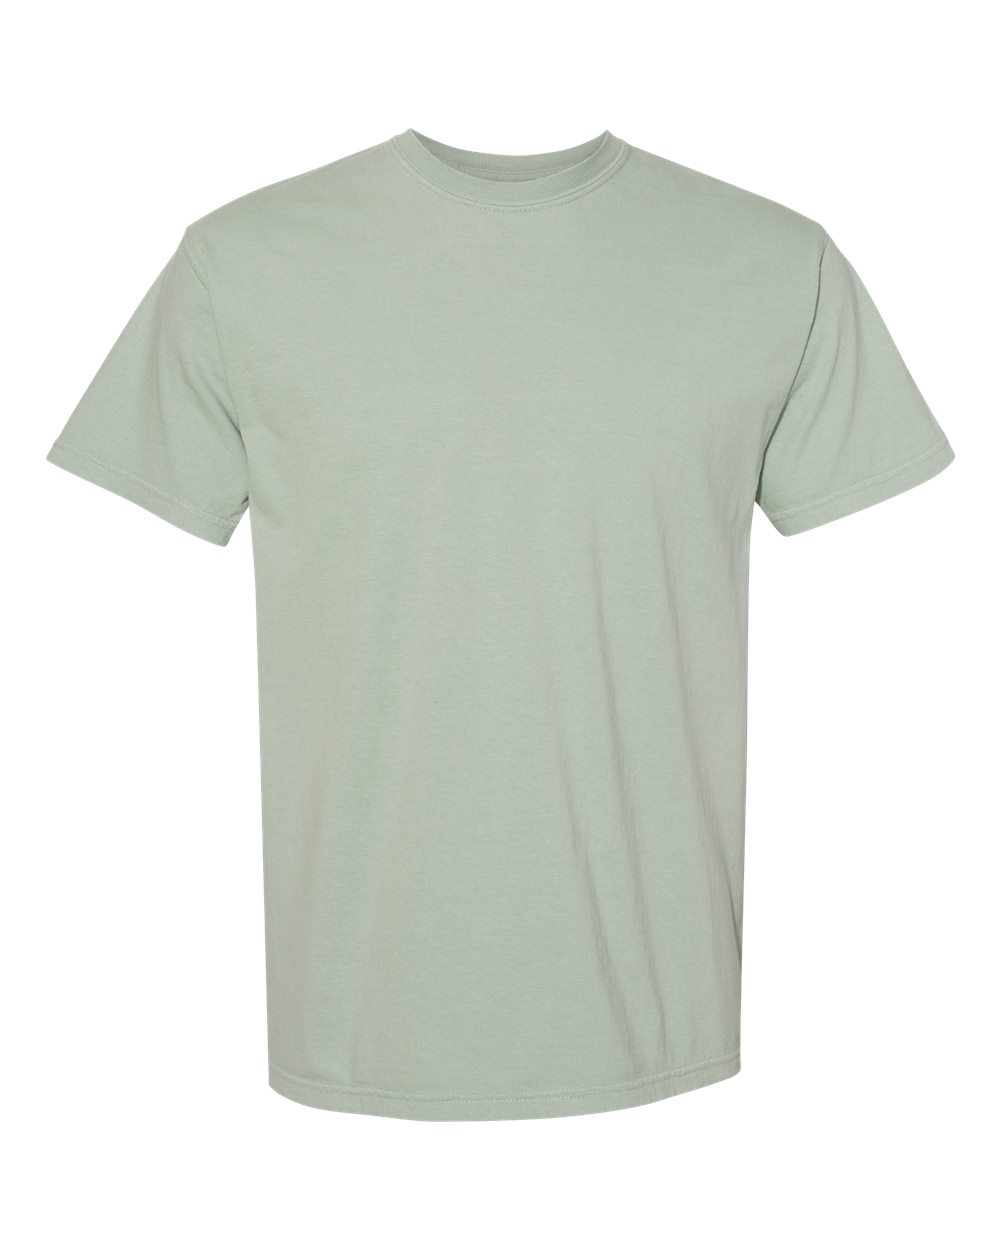 Comfort Colors Garment-Dyed Tee (1717) in Bay